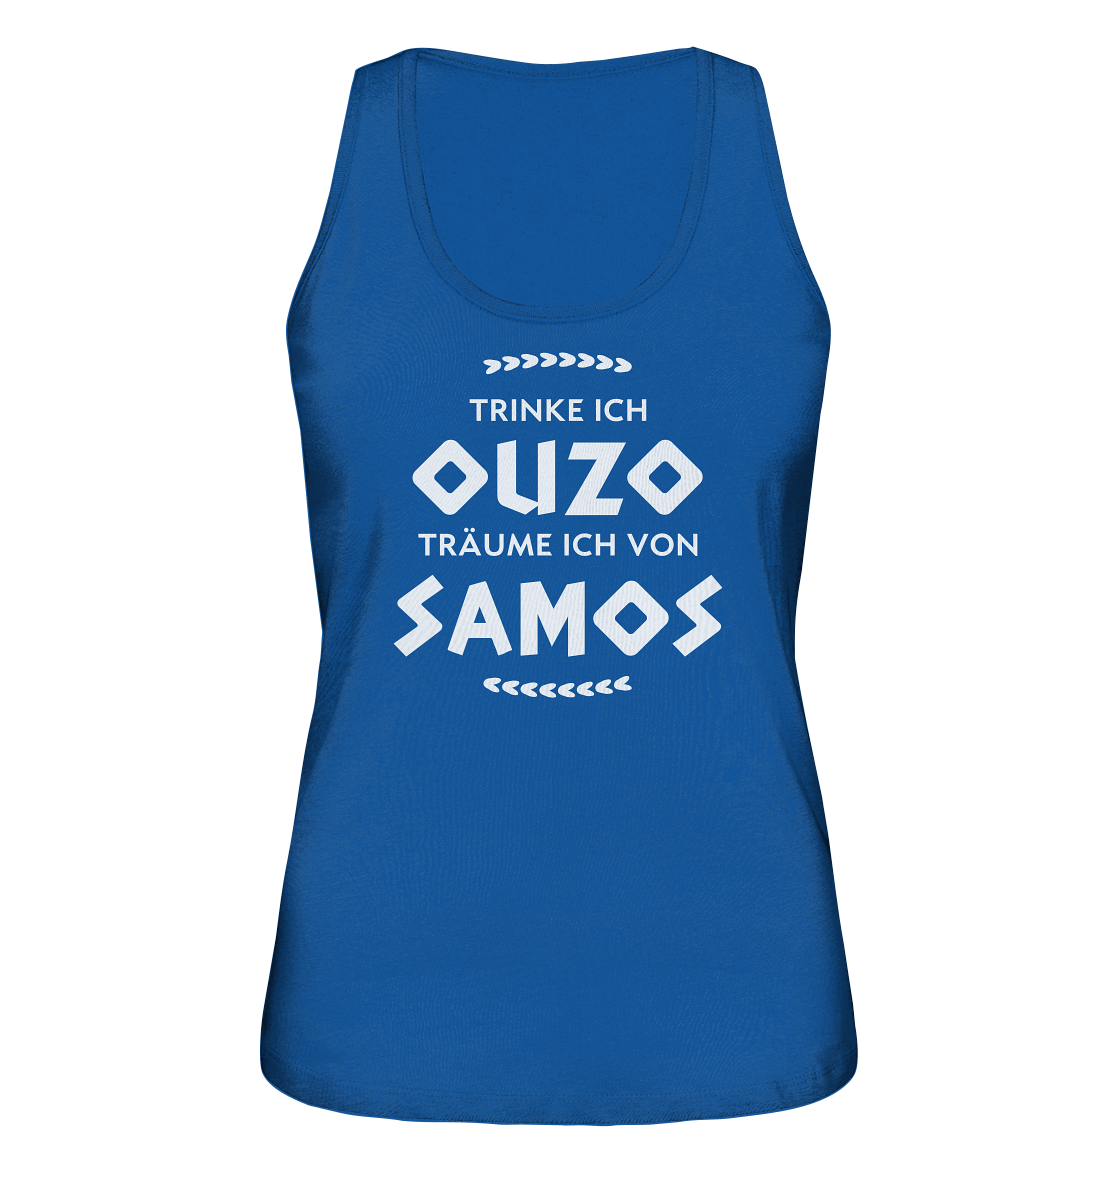 When I drink Ouzo I dream about Samos - Ladies Organic Tank Top